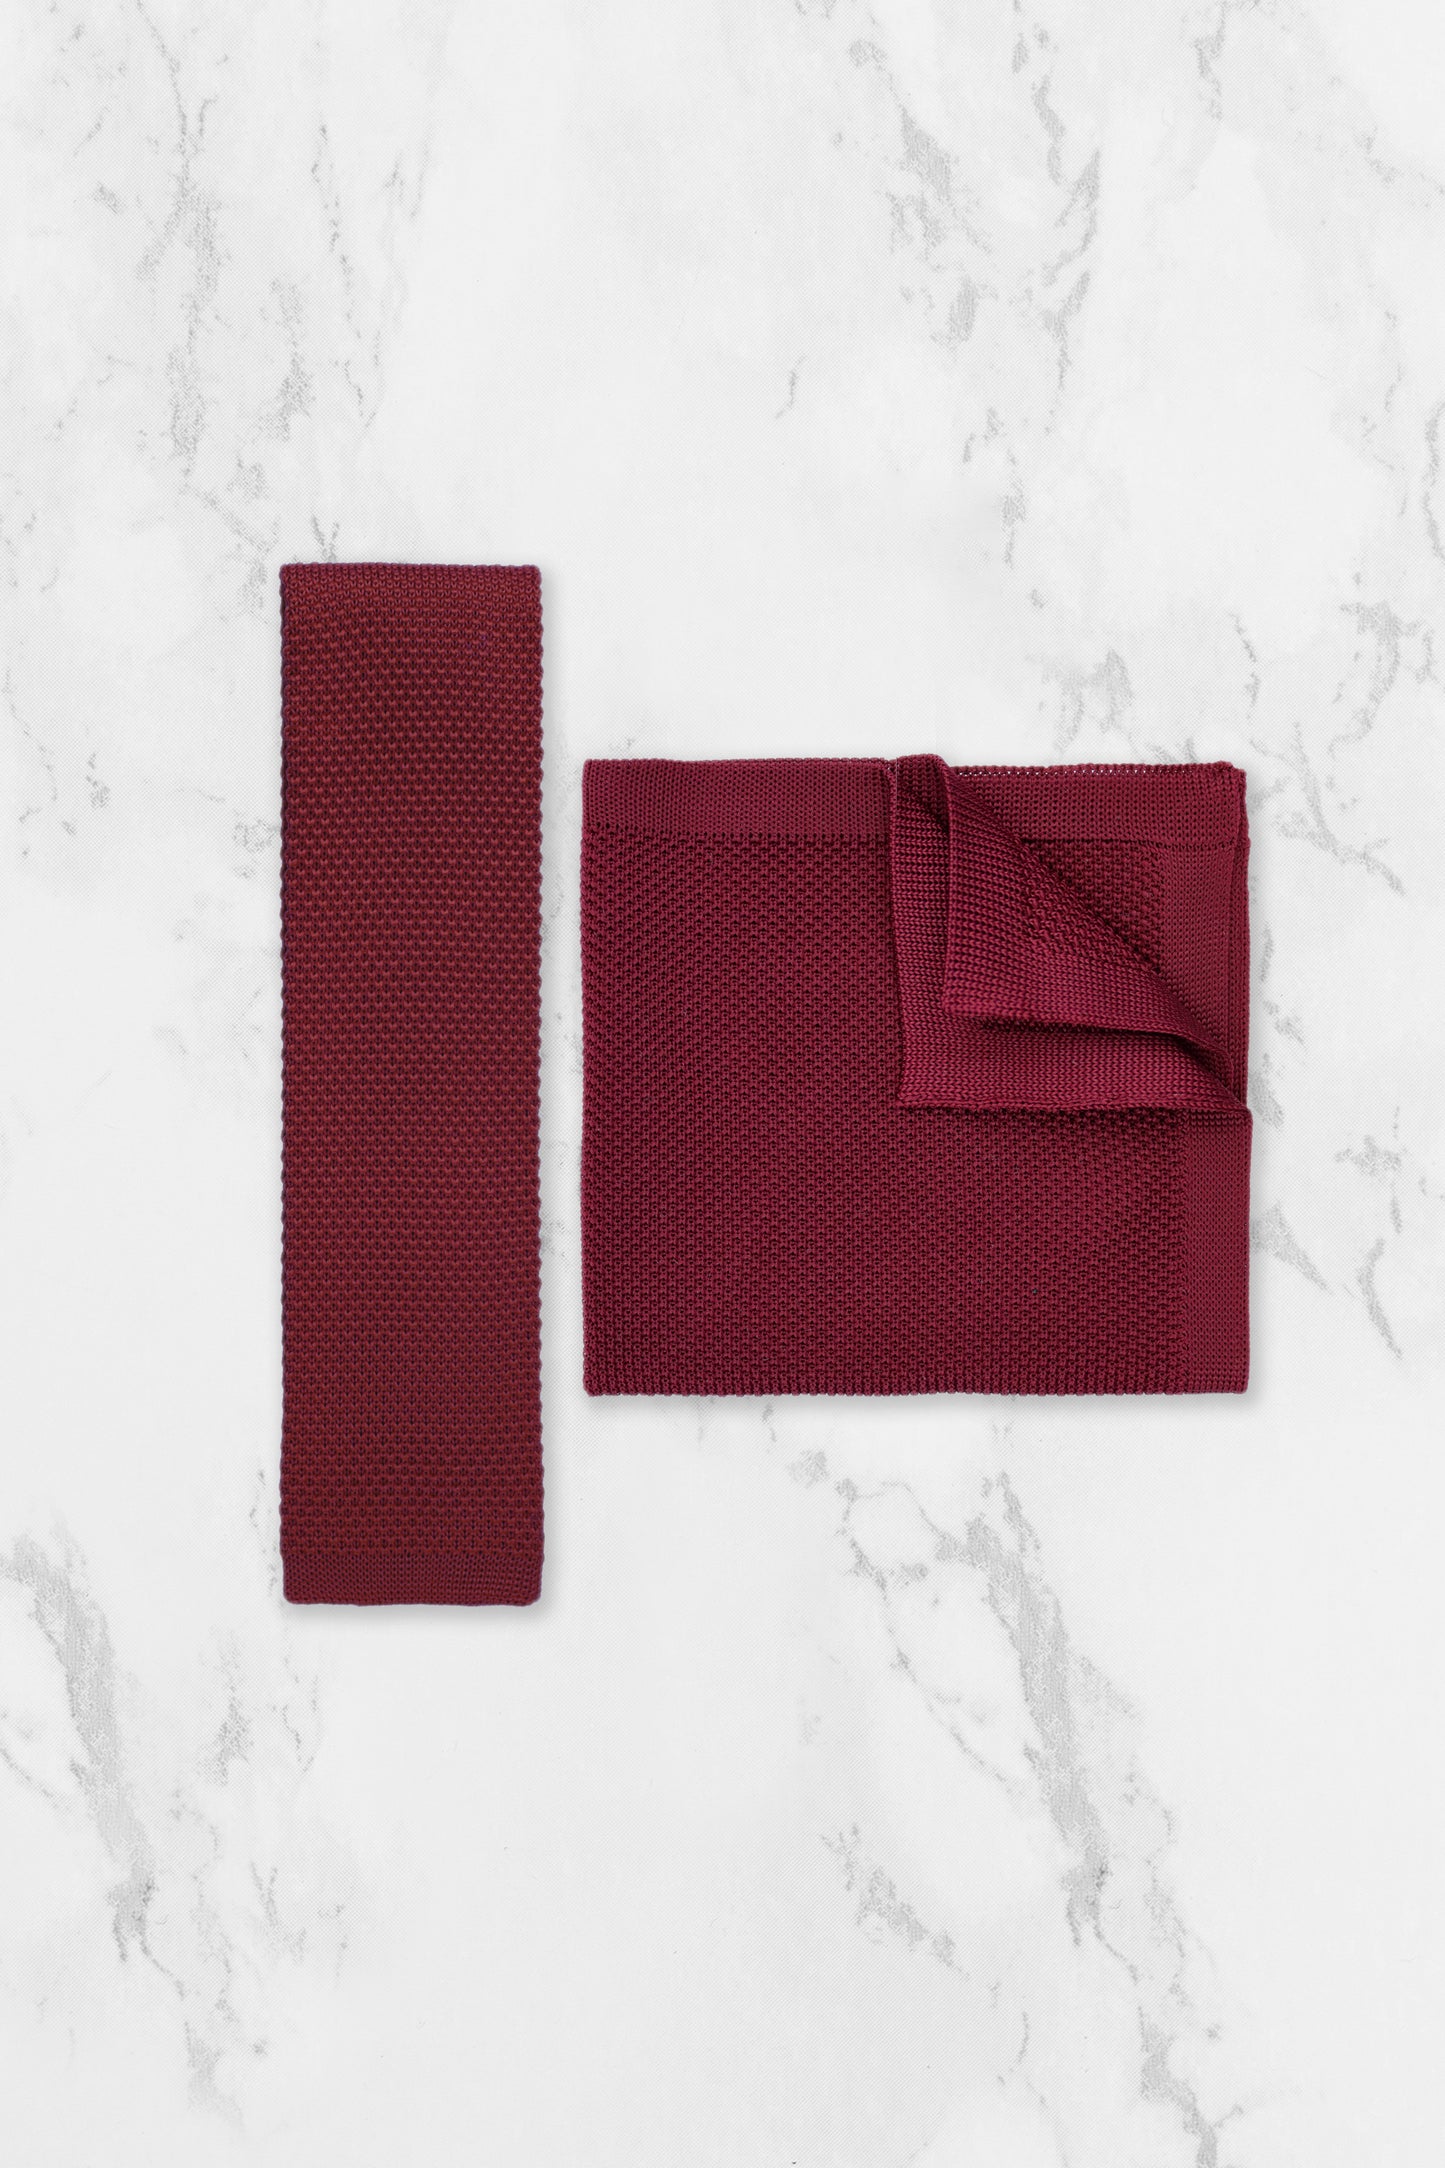 100% Polyester Square End Knitted Tie - Burgundy Red